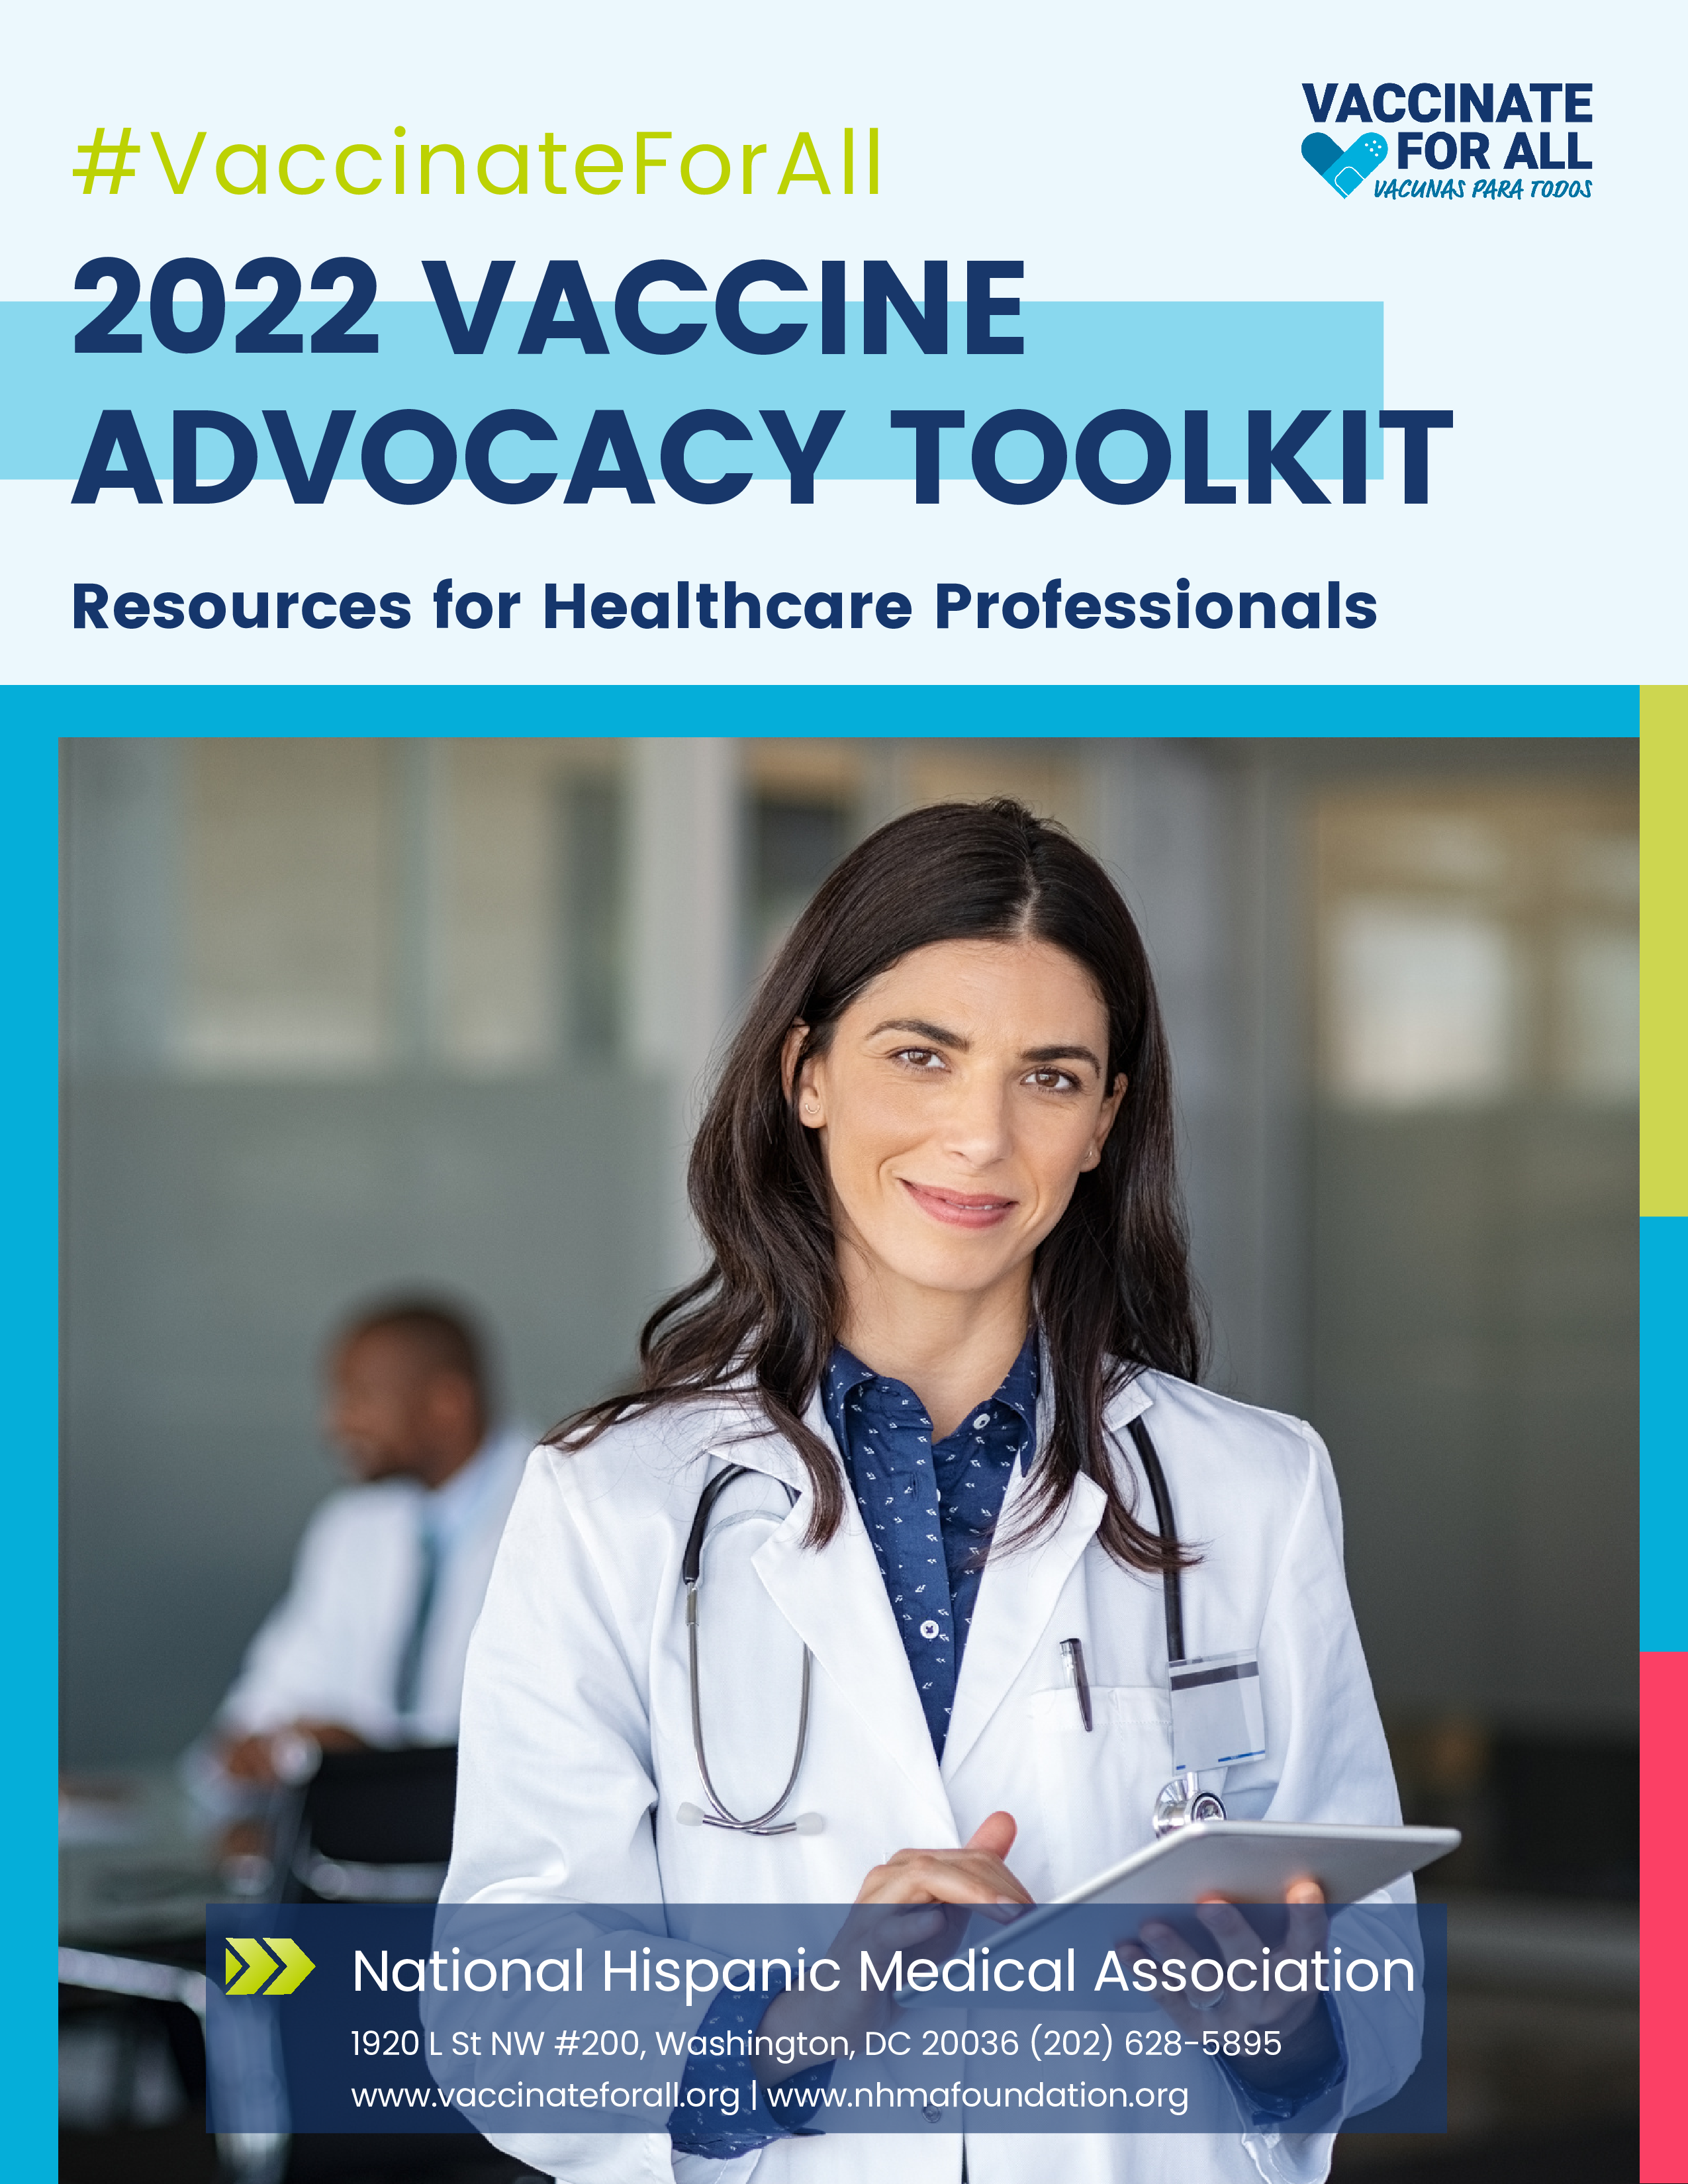 Smiling female healthcare professional with long dark brown hair wearing a lab coat. The vaccinate for all logo is at the top right corner and National Hispanic Medical Association name and information is at the bottom.